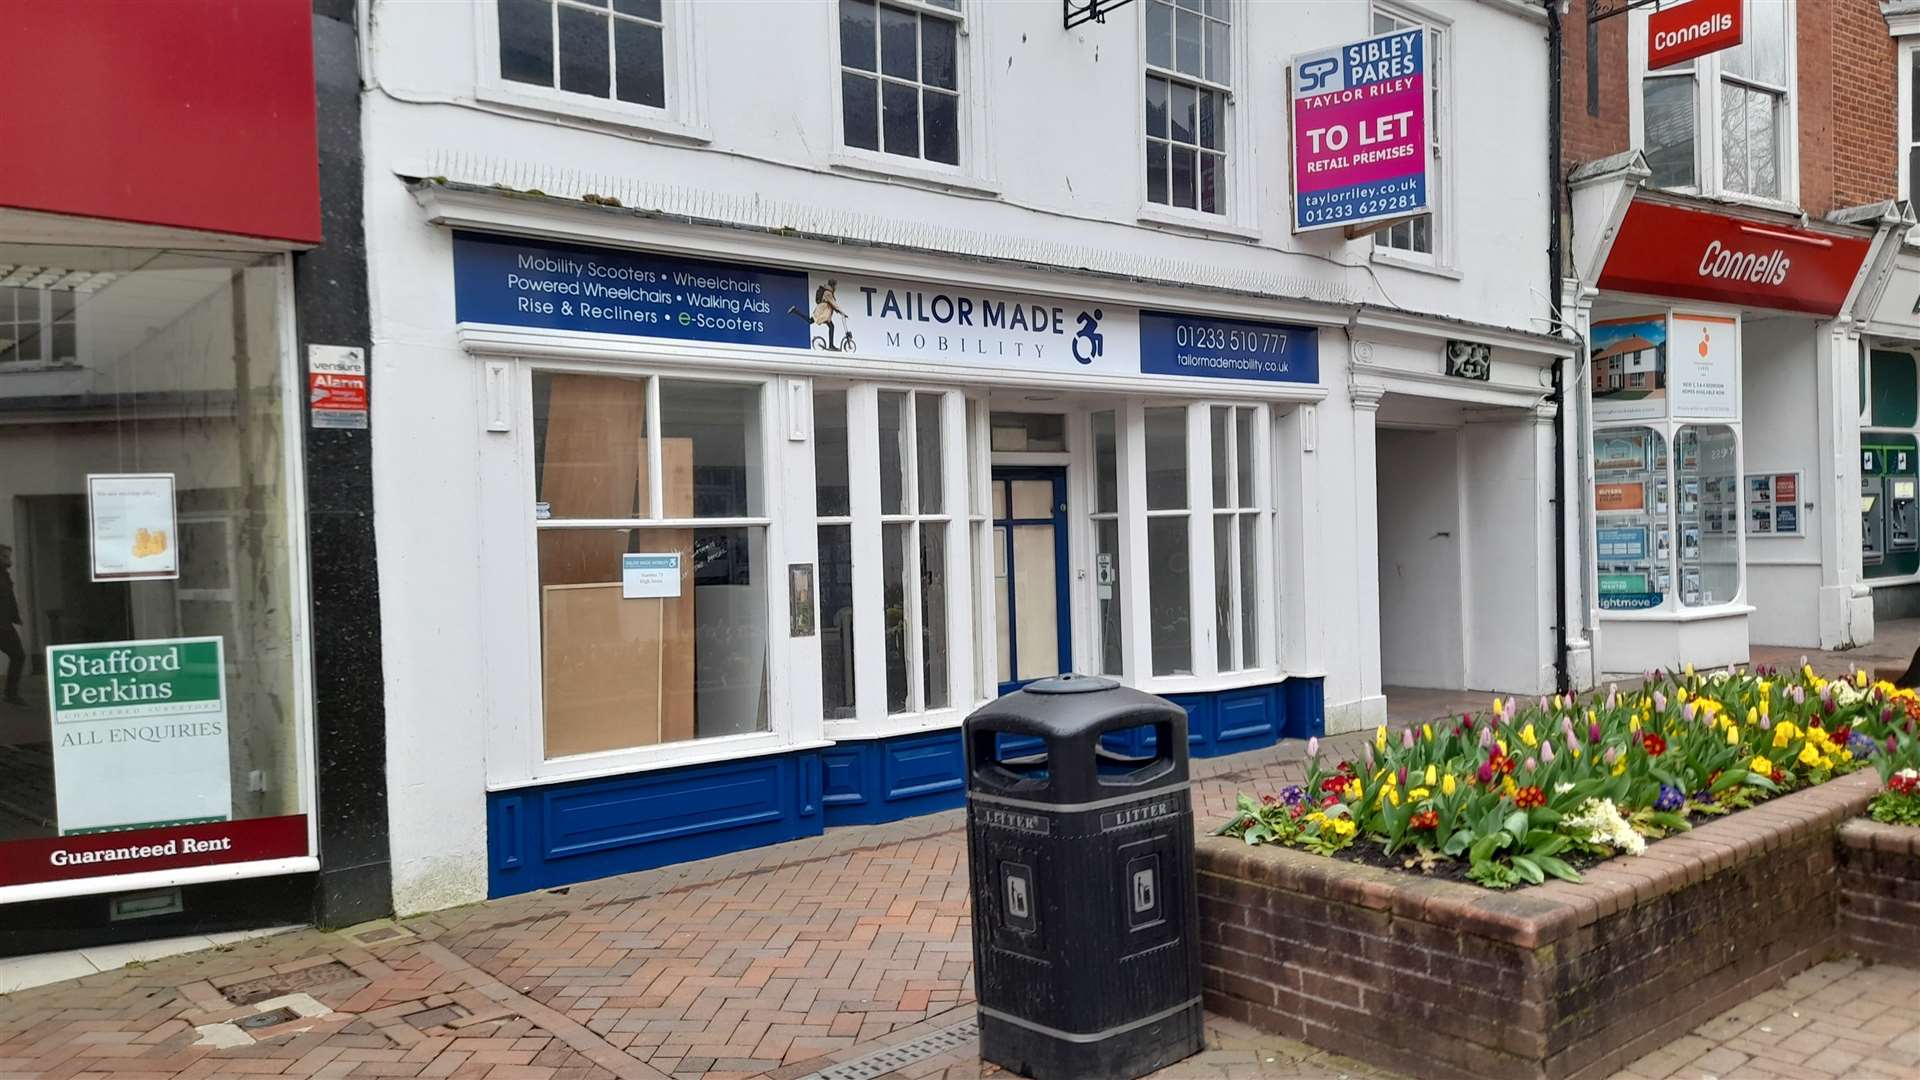 Tailor Made Mobility now occupies the former Nationwide branch